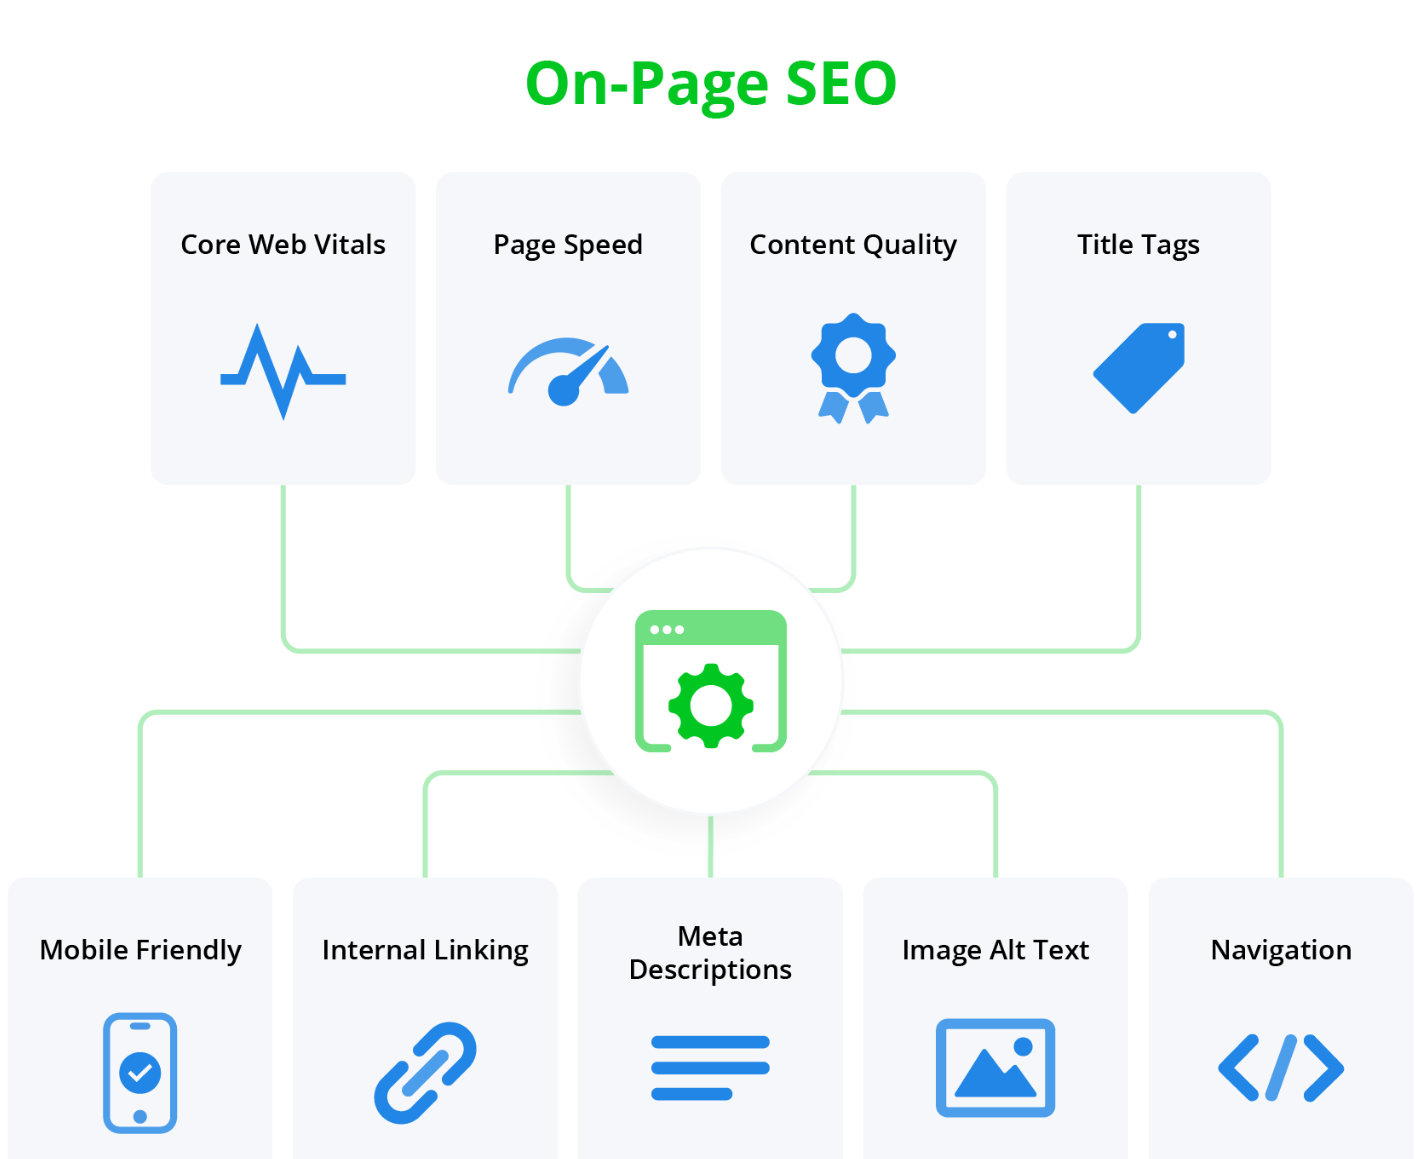 On-Page Seo